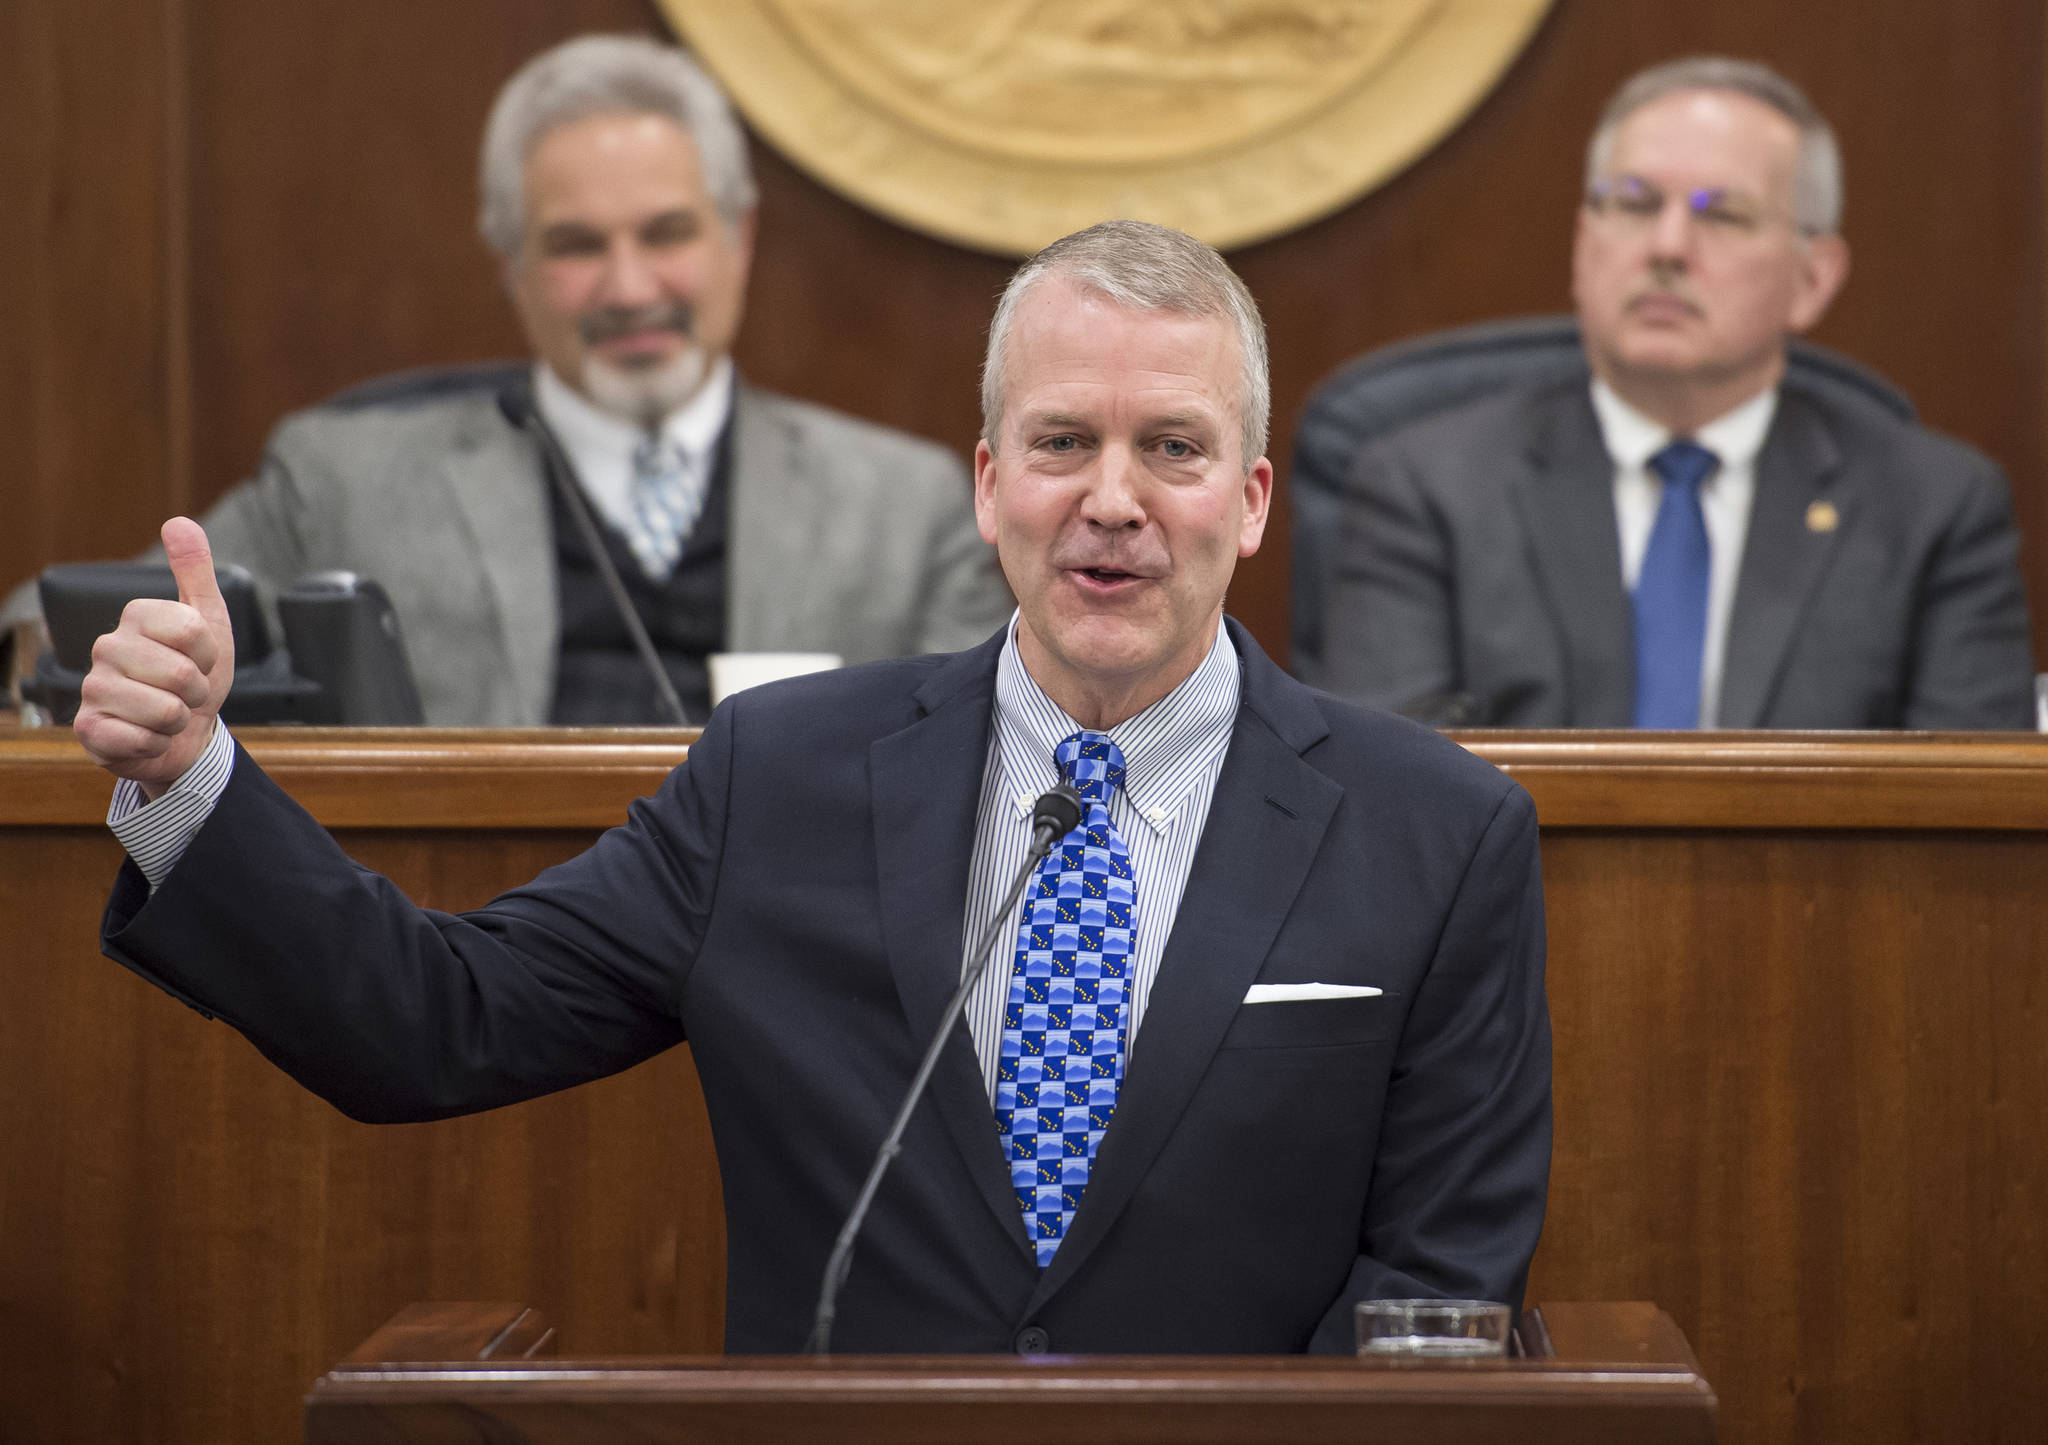 In this Feb. 26, 2018 photo, U.S. Sen. Dan Sullivan, R-Alaska, gives a thumbs up while speaking about the opening of the Arctic National Wildlife Refuge to oil drilling during his annual speech to a joint session of the Alaska Legislature at the Capitol. (Michael Penn | Juneau Empire File)